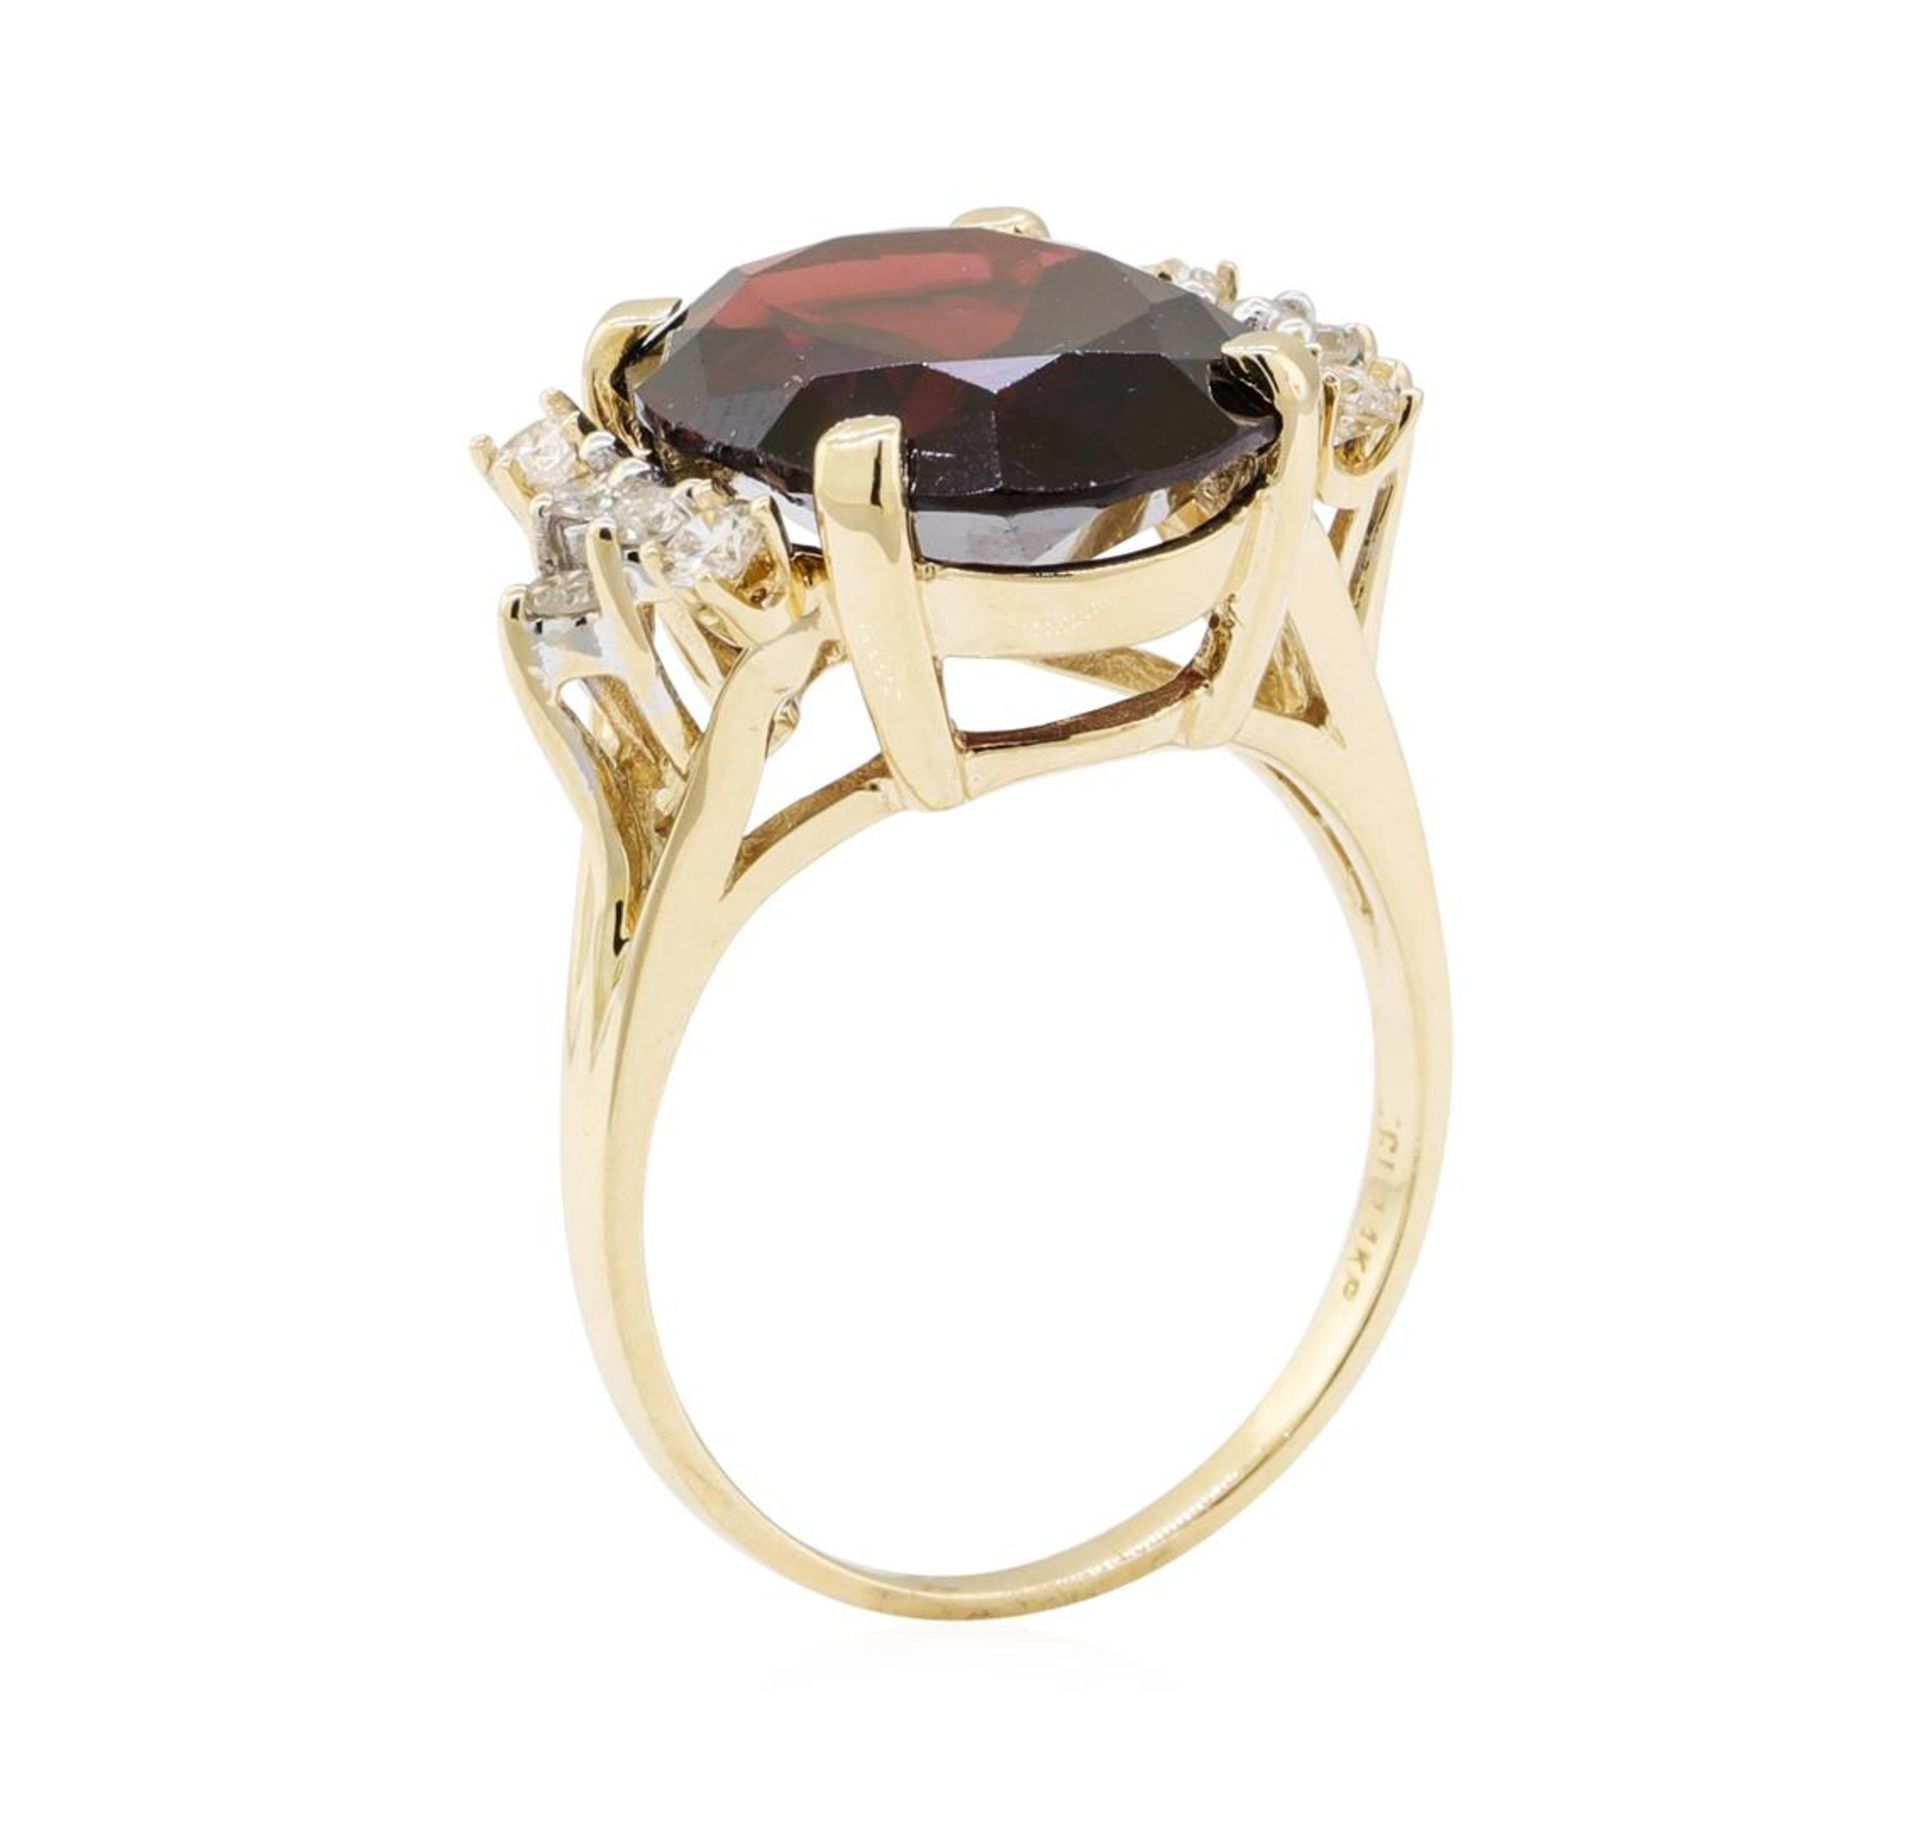 10.20 ctw Garnet and Diamond Ring - 14KT Yellow Gold - Image 4 of 4